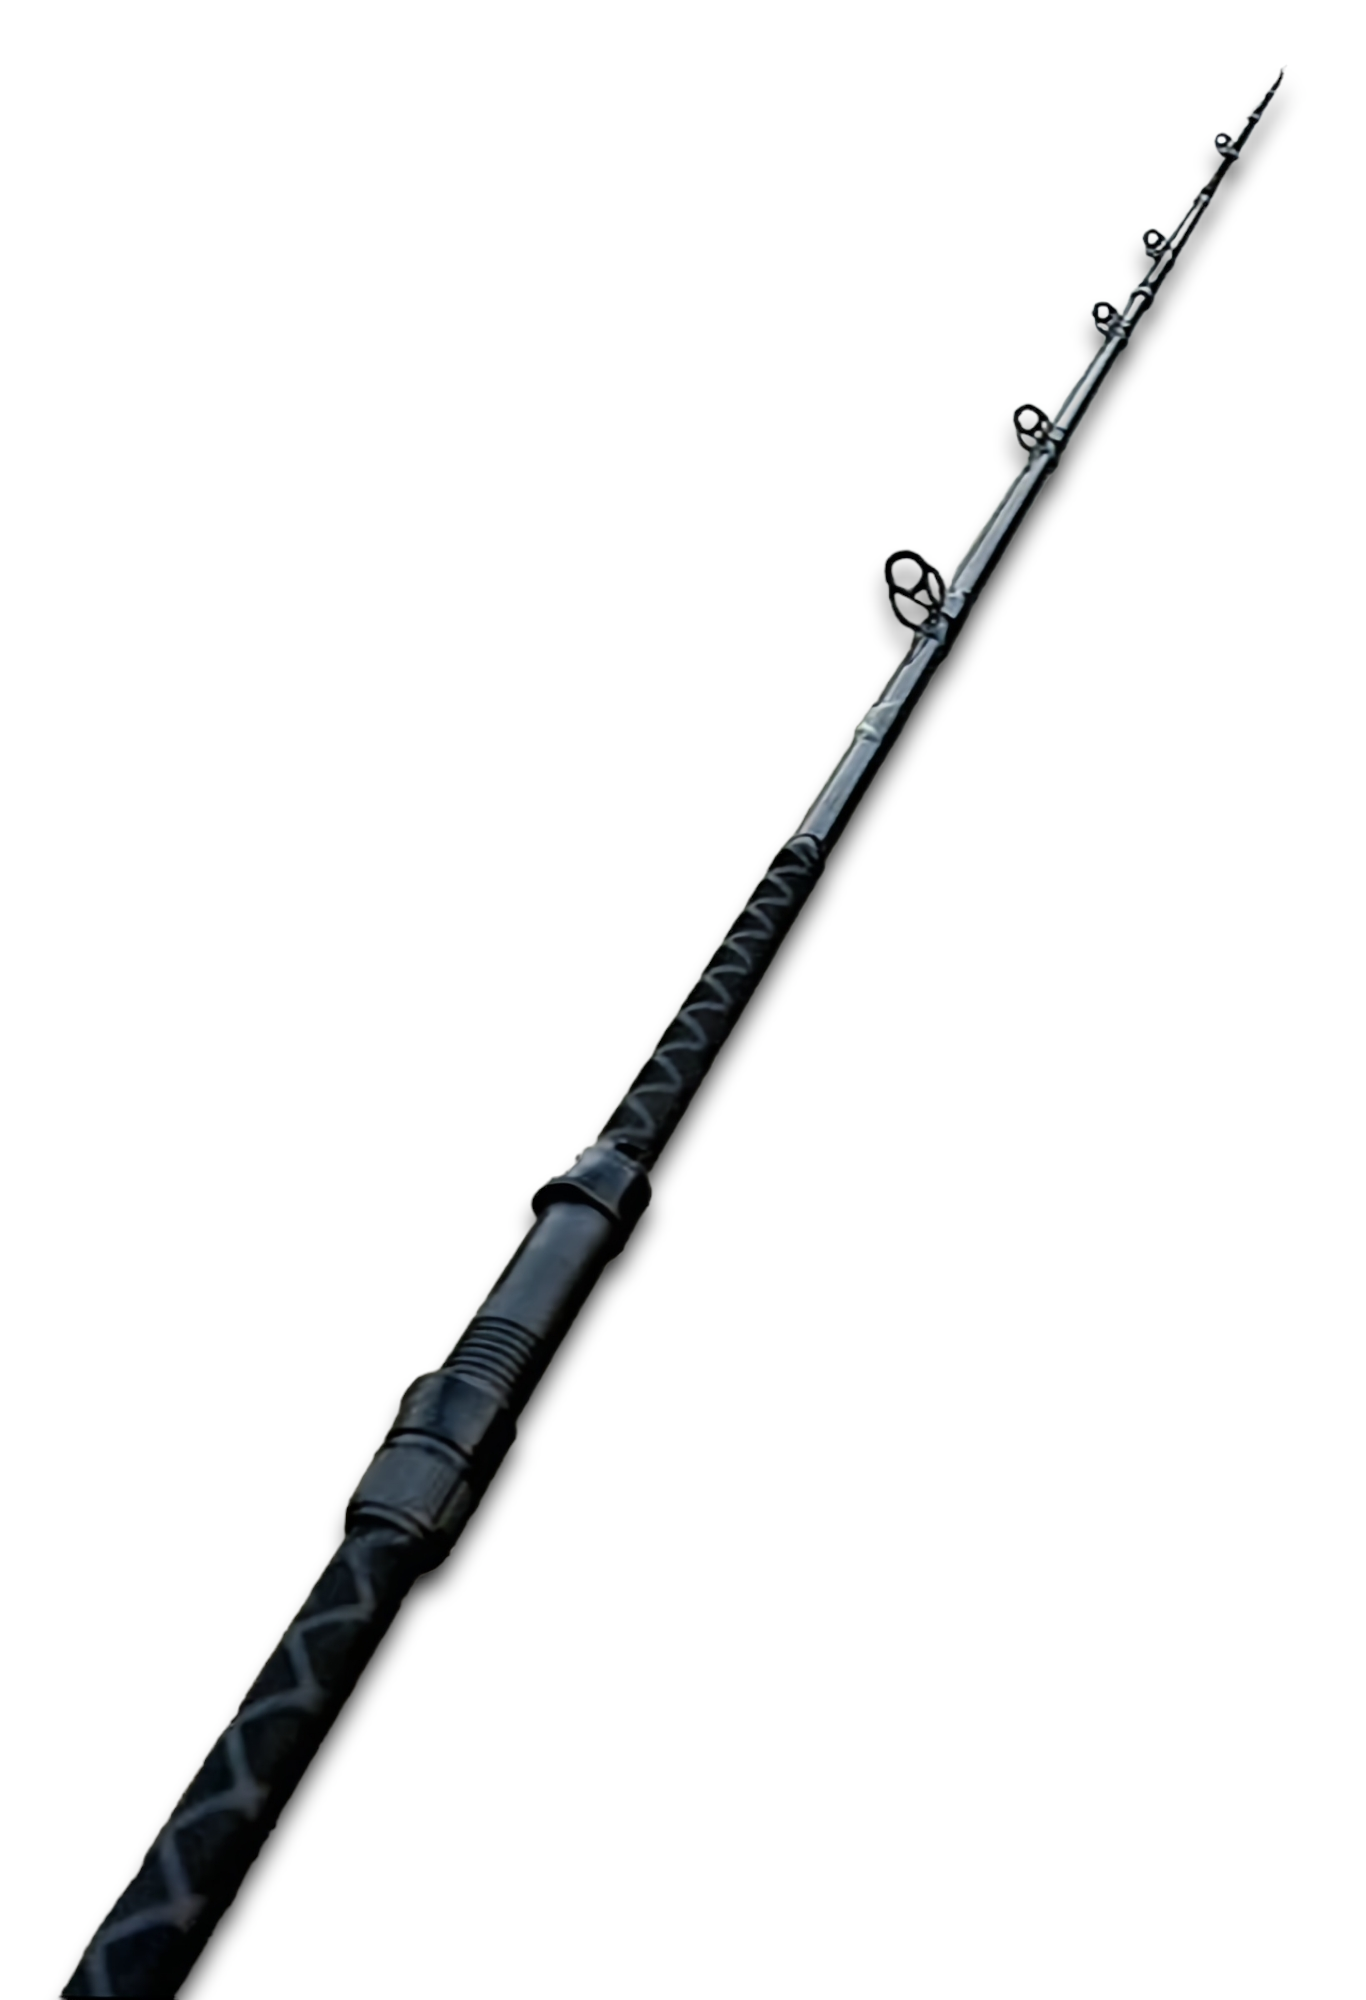 Alpha Rod: 11 foot surf casting rod – Schott Bait and Tackle